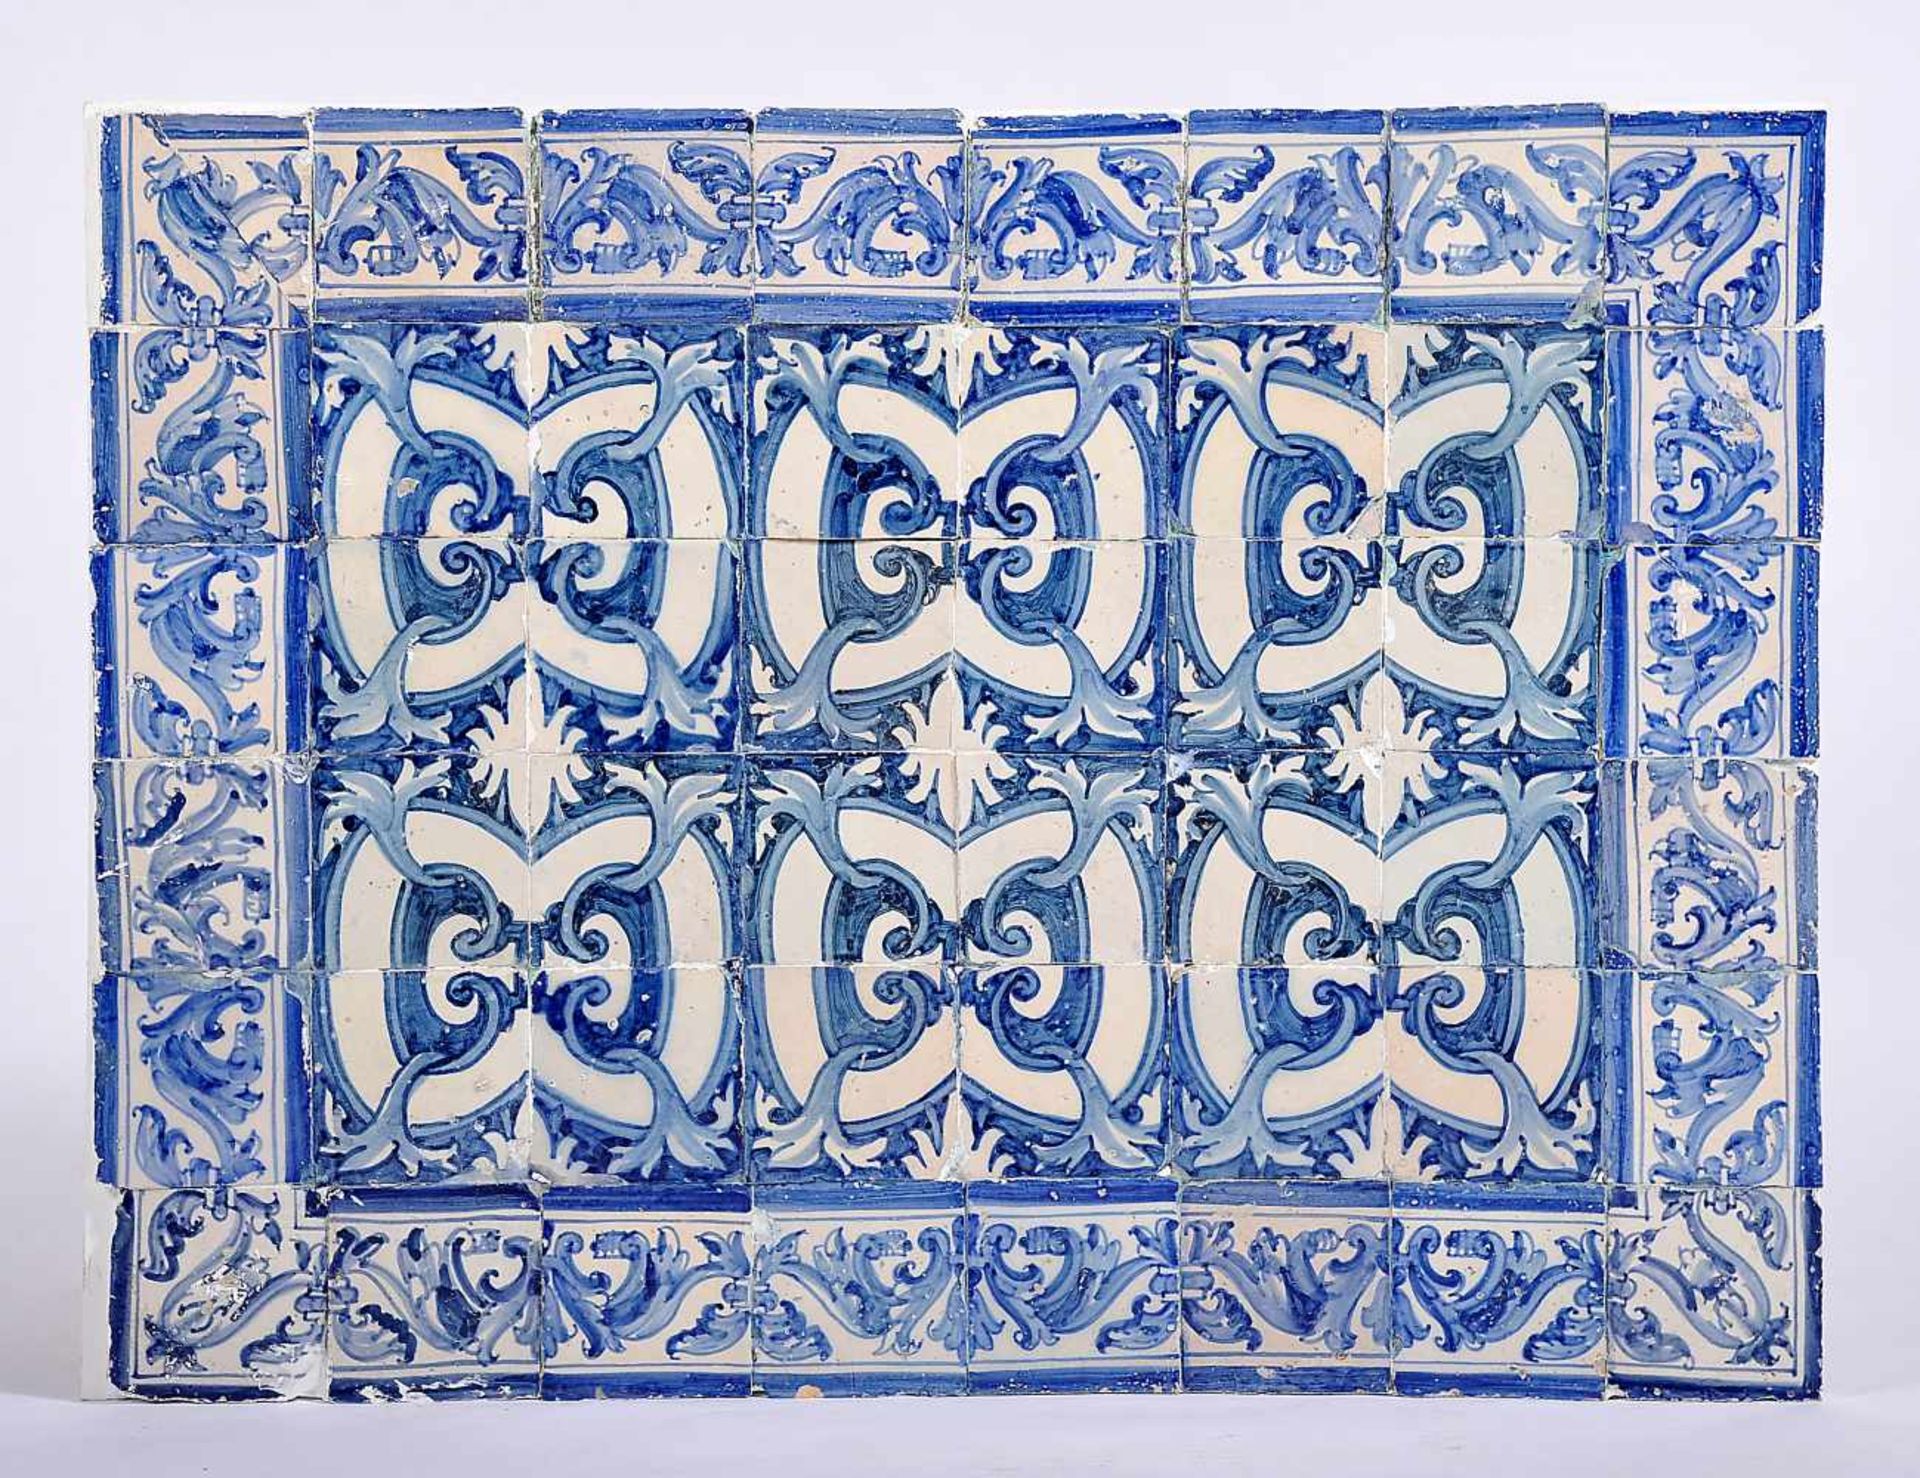 Fleurons, forty-eight tiles panel, blue and white decoration, Portuguese, 17th C., replaced part